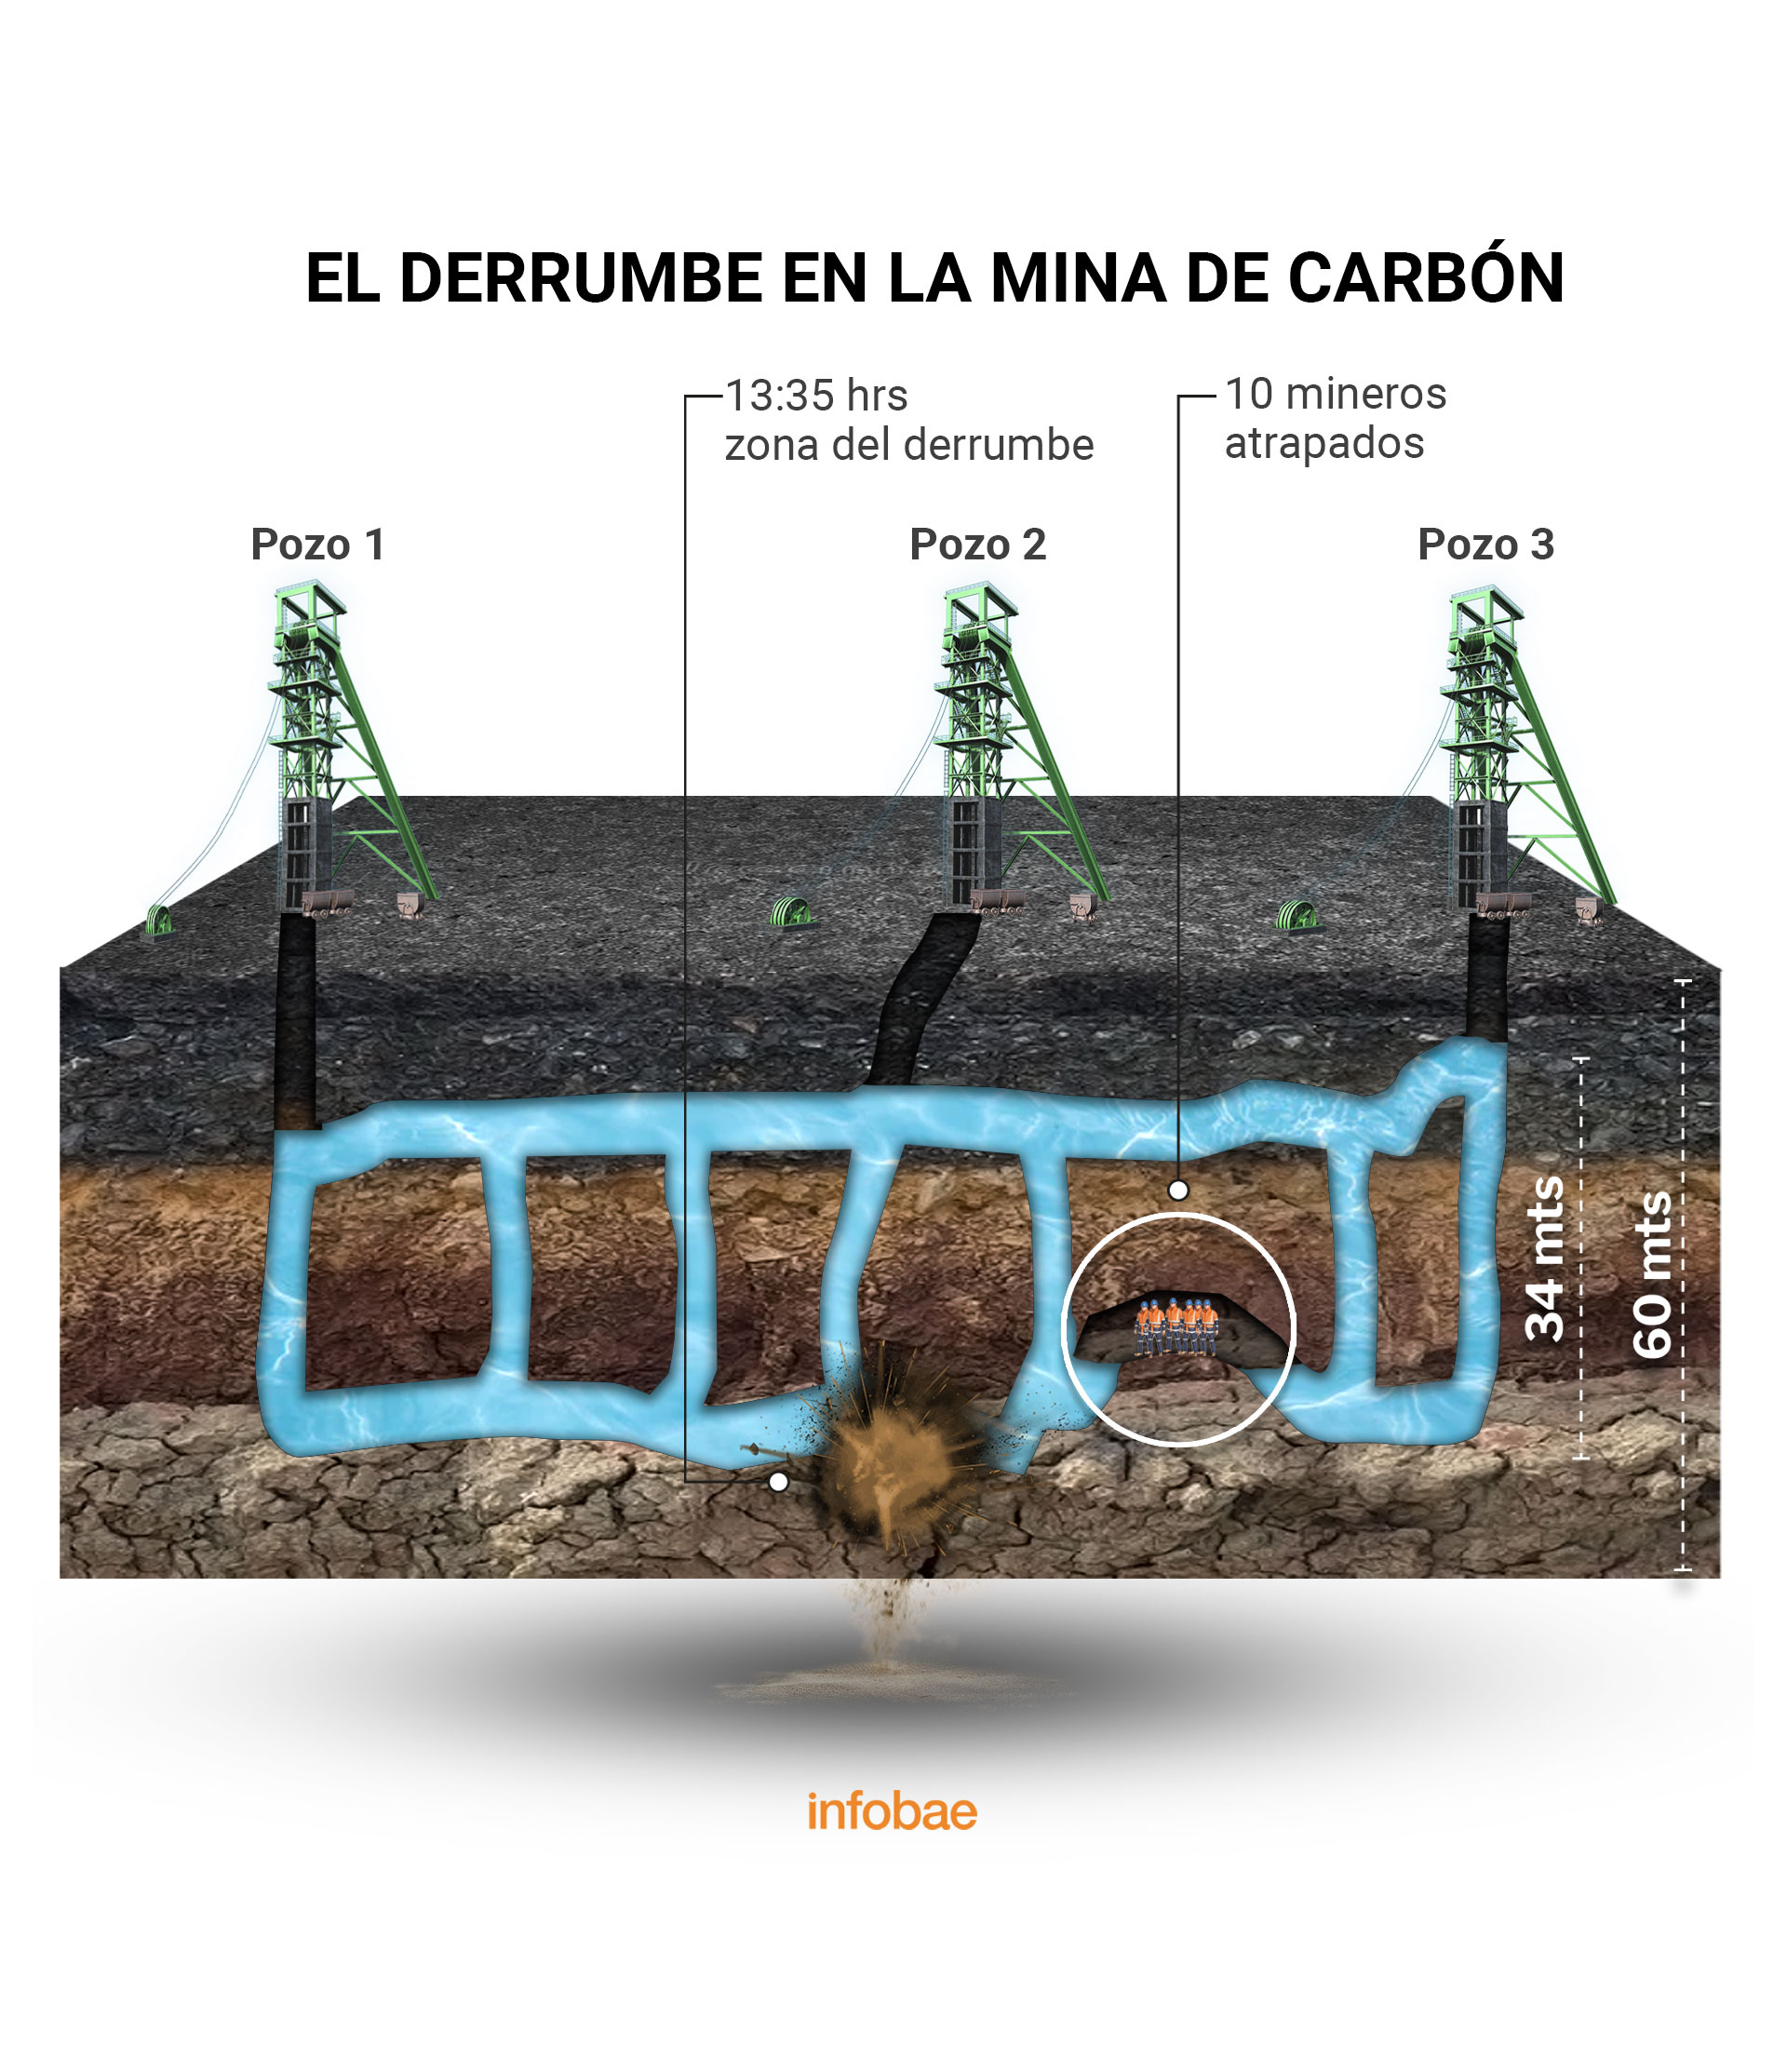 The collapse trapped 10 miners 60 meters deep, which were surrounded by tunnels with flooding up to 34 meters.  (Illustration: Jovani Perez / Infobay)